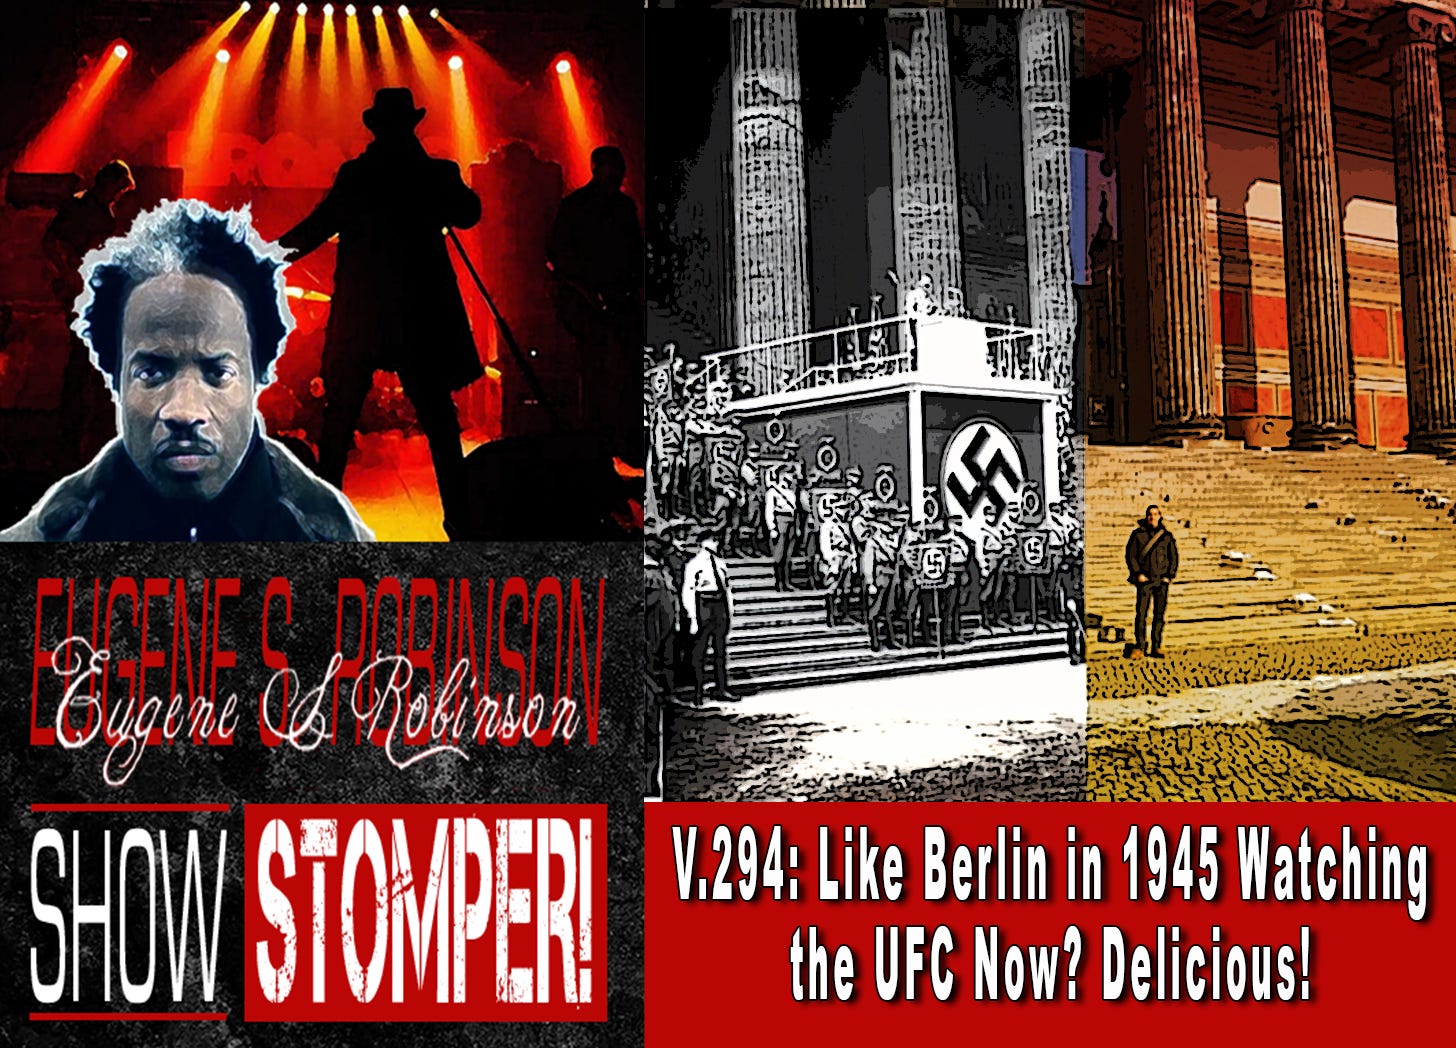 V.294: Like Berlin in 1945 Watching the UFC Now? Delicious! On The Eugene S. Robinson Show Stomper!